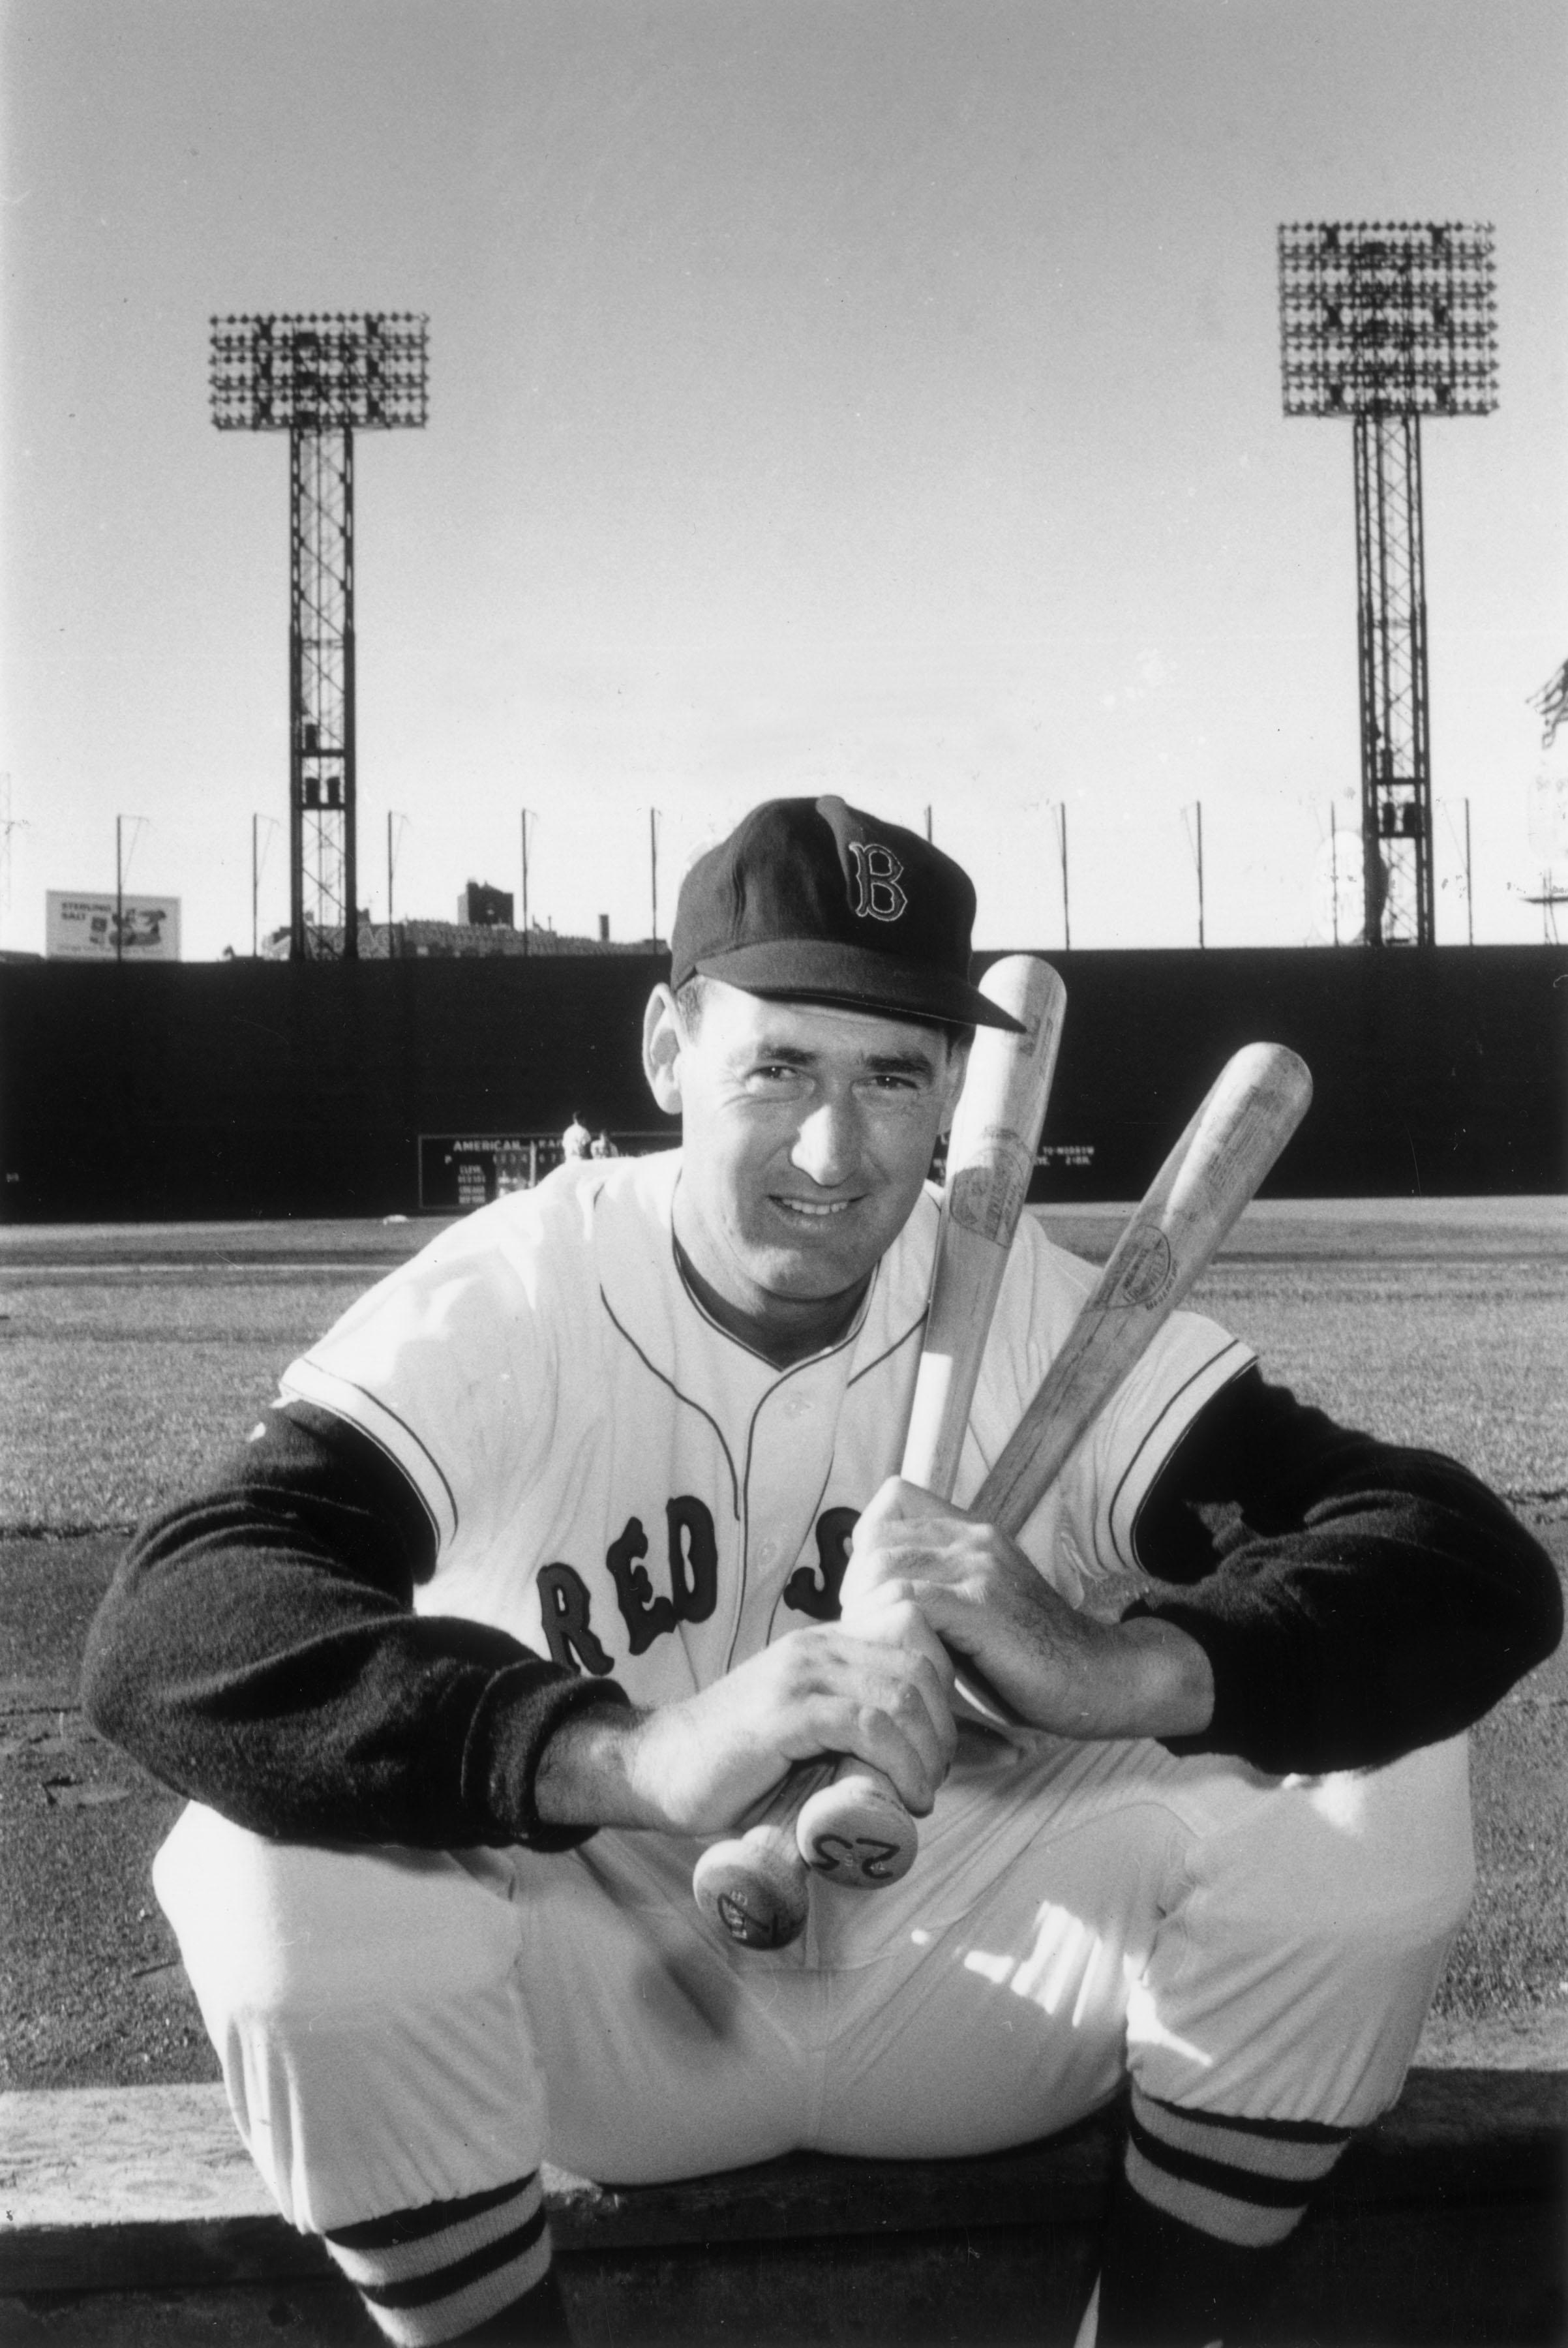 Slim Aarons Black and White Photograph - Ted Williams (Left Fielder for Boston Red Sox), Fenway Park, Boston